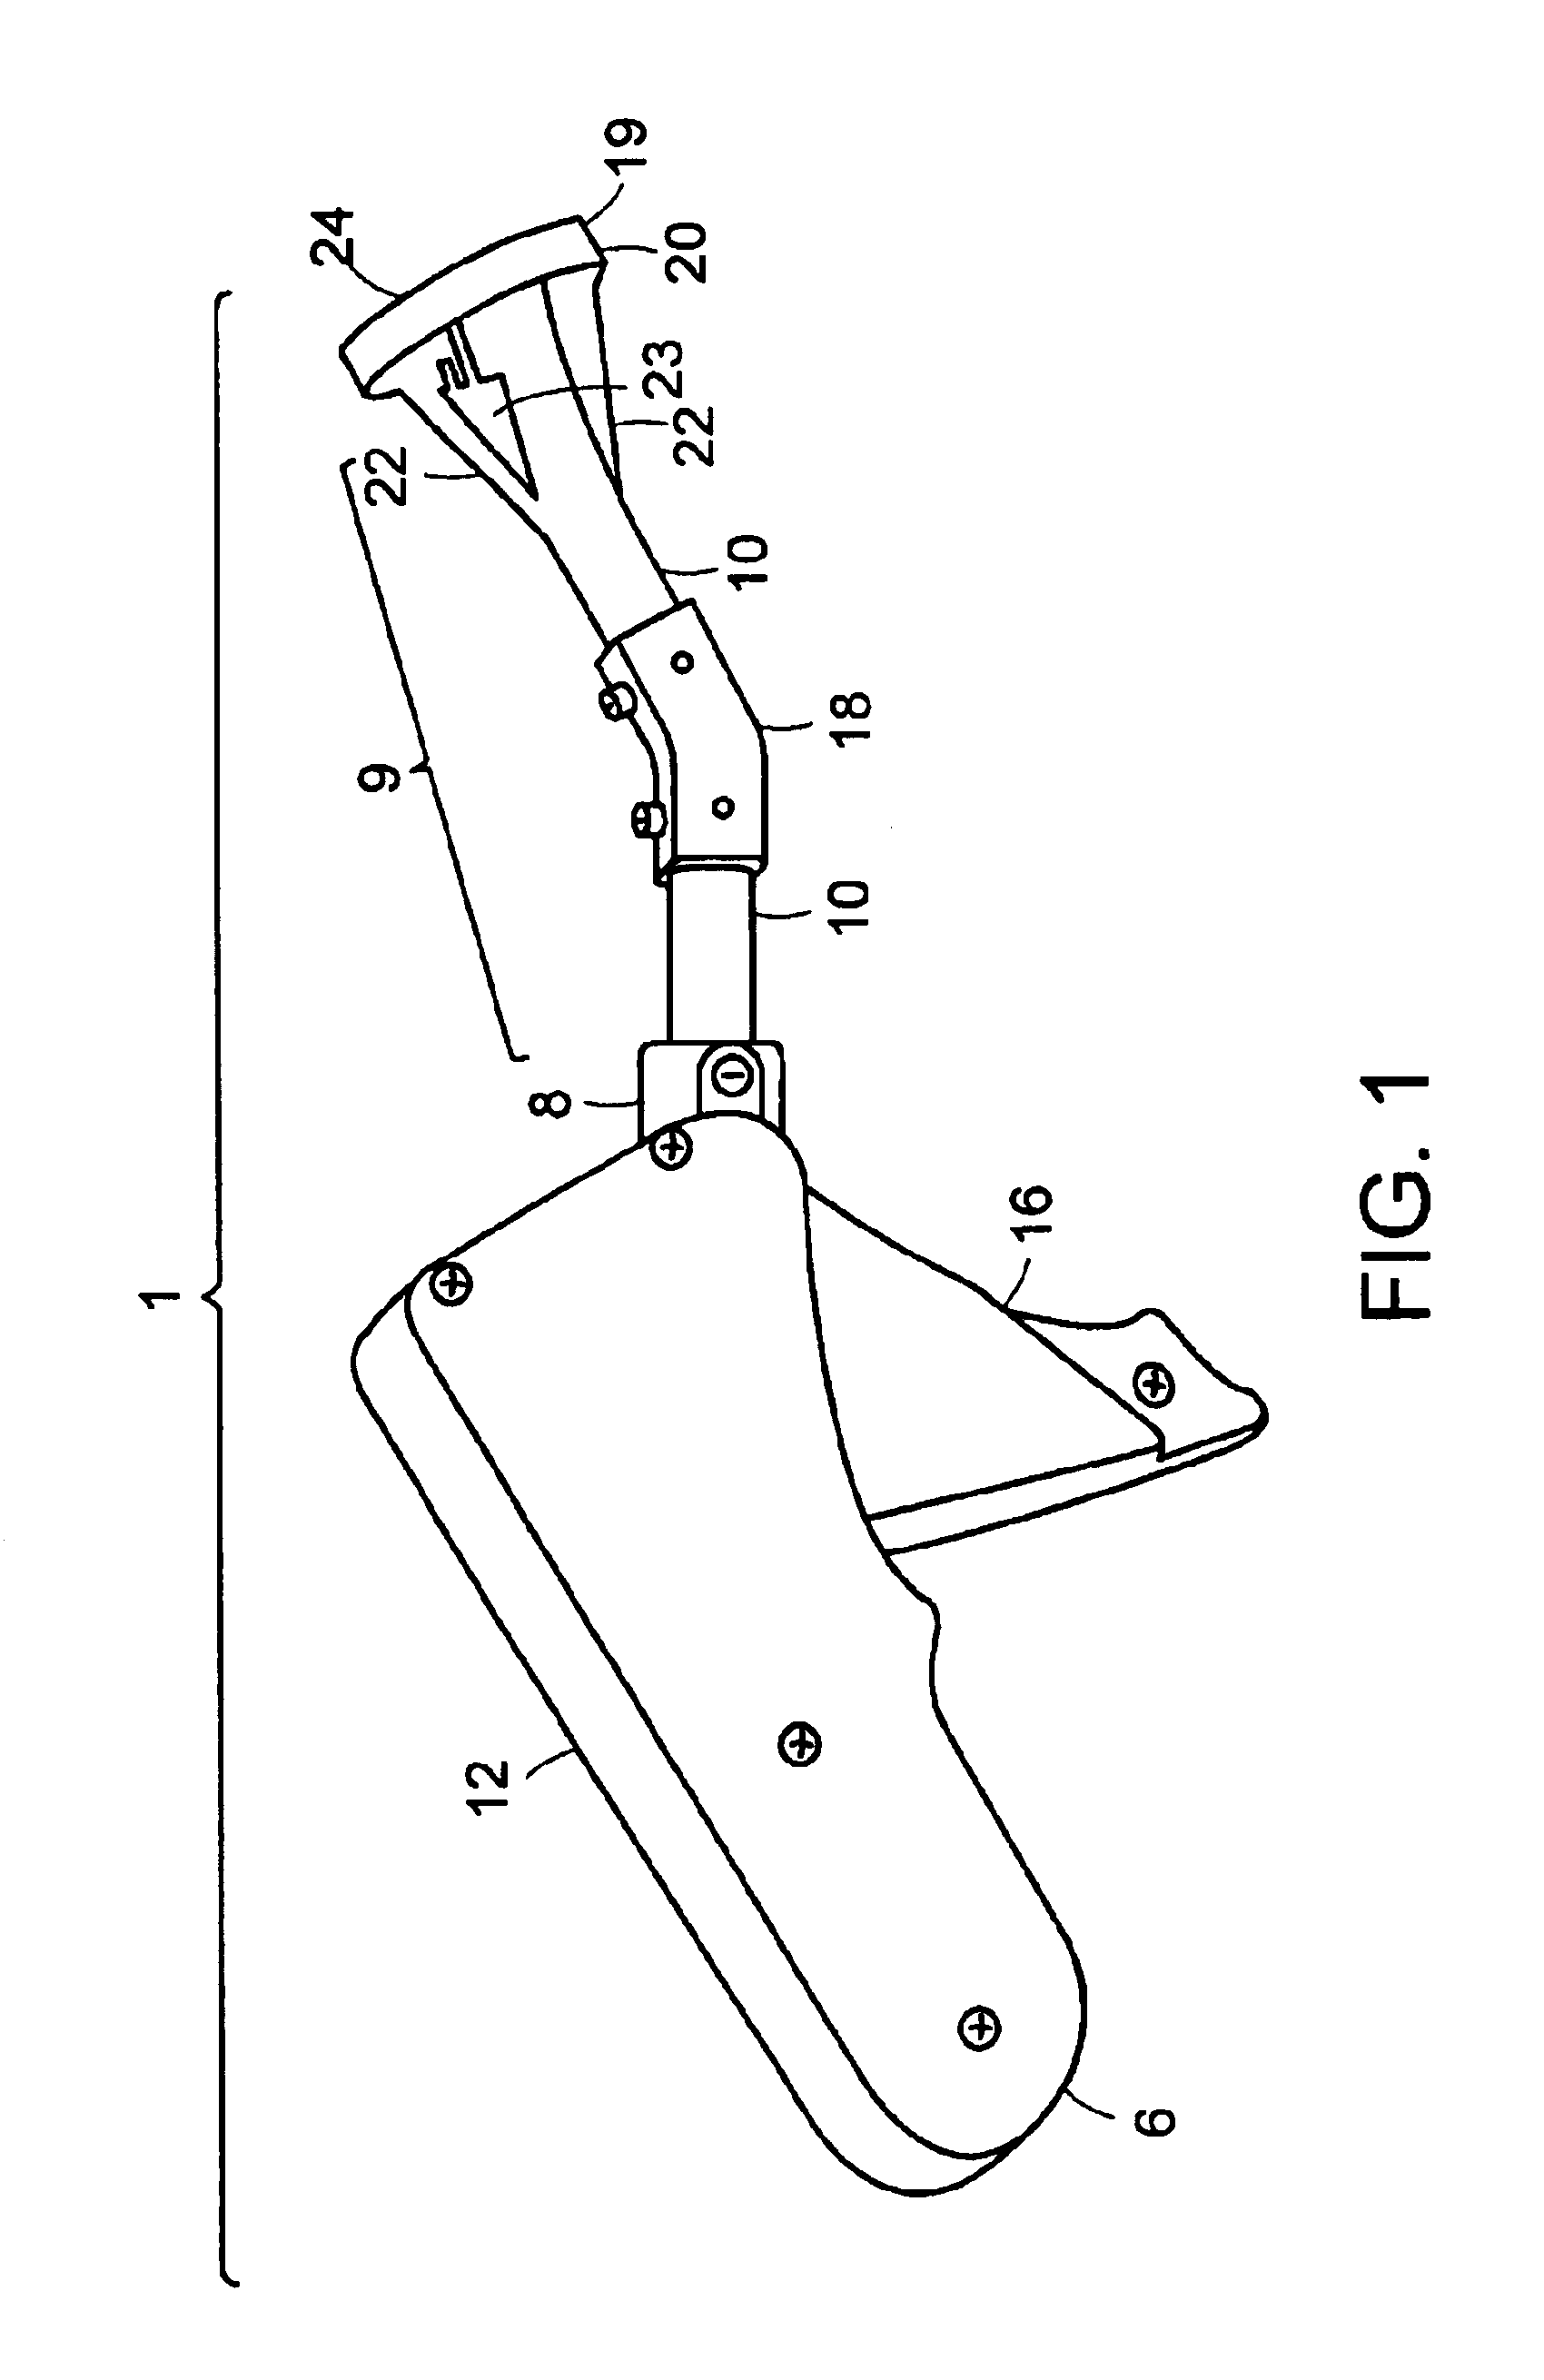 Apparatus and method for surgical suturing with thread management